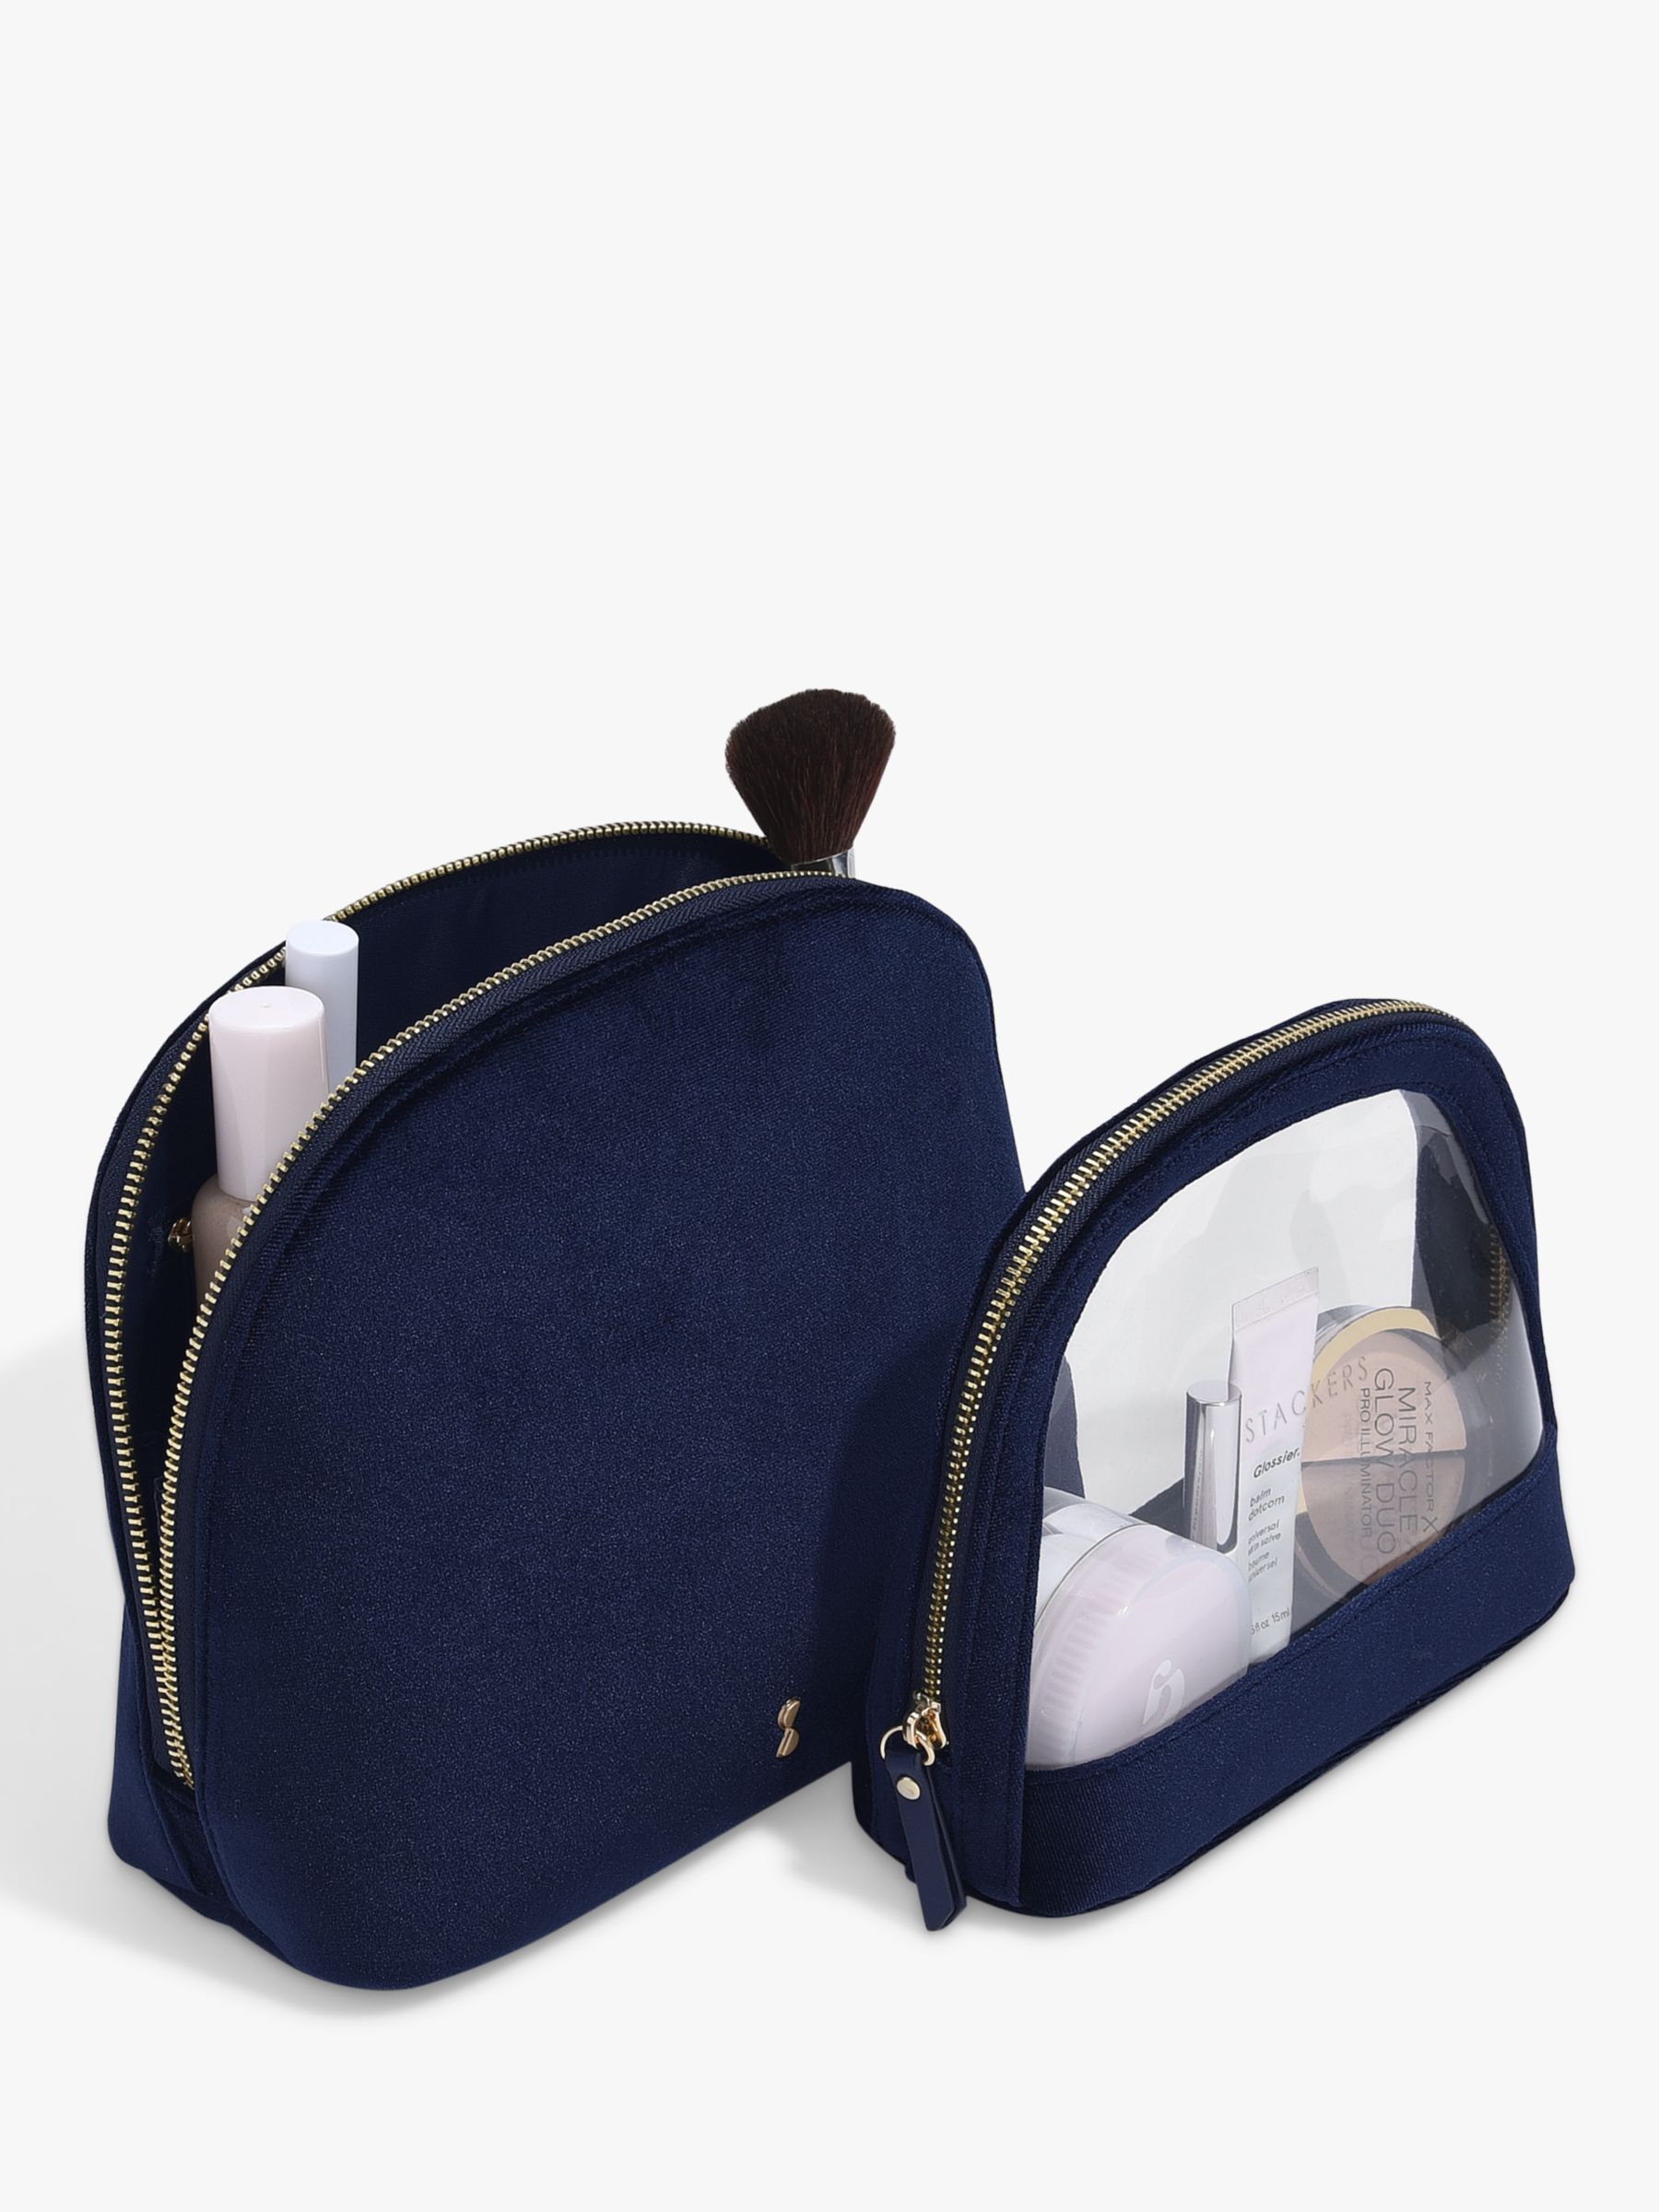 Stackers Curve Cosmetics Bag, Set of 2, Navy